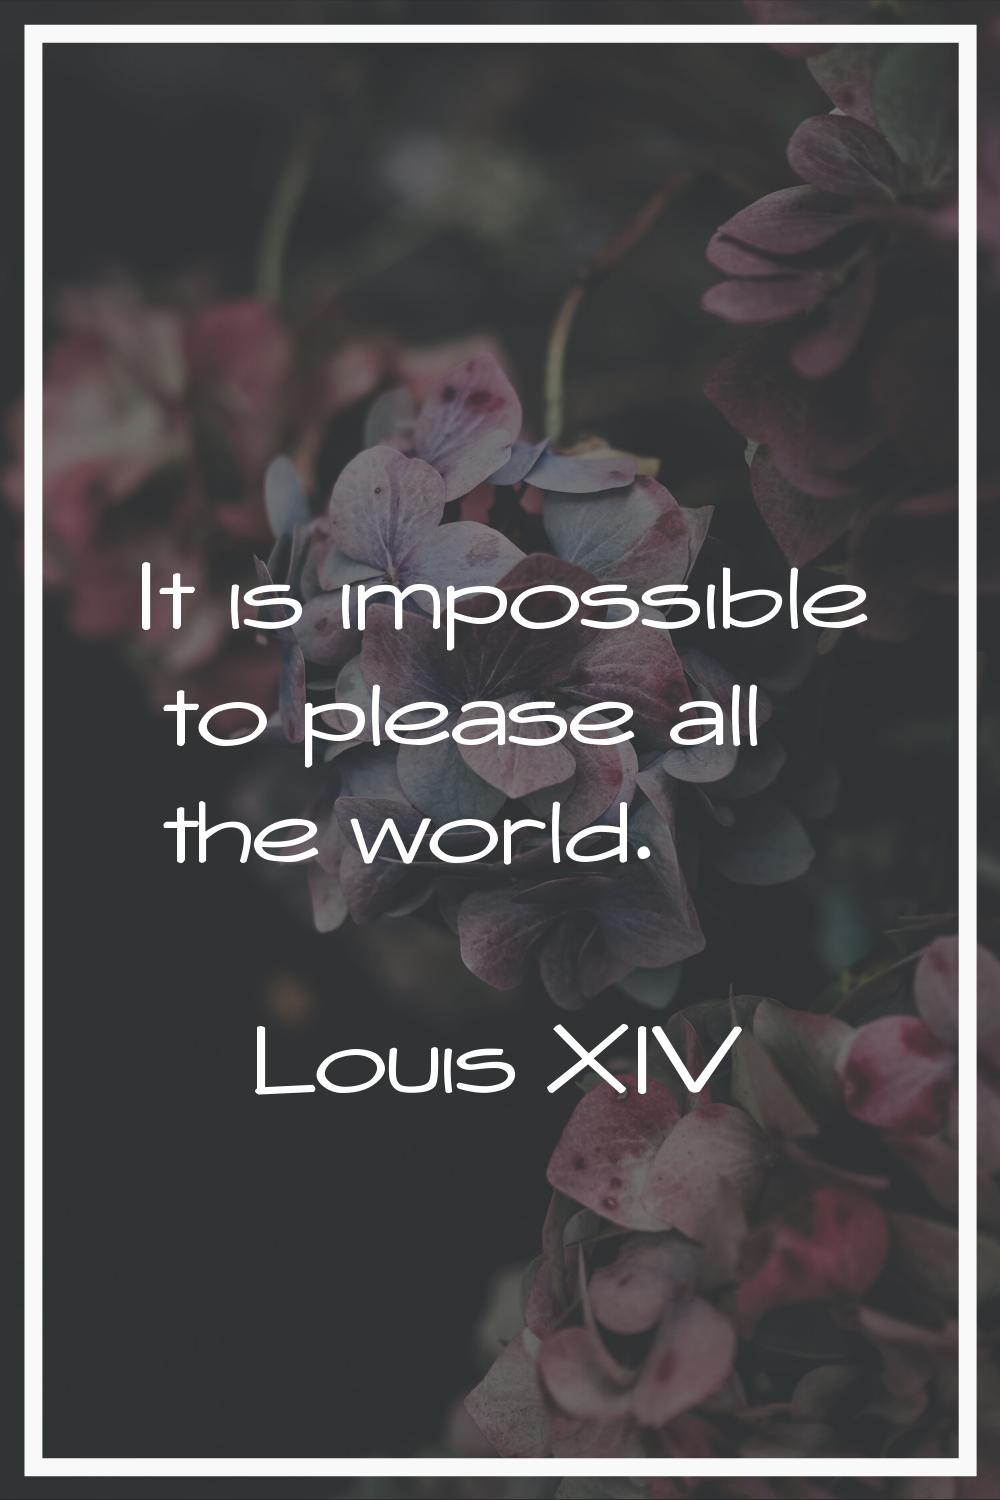 It is impossible to please all the world.